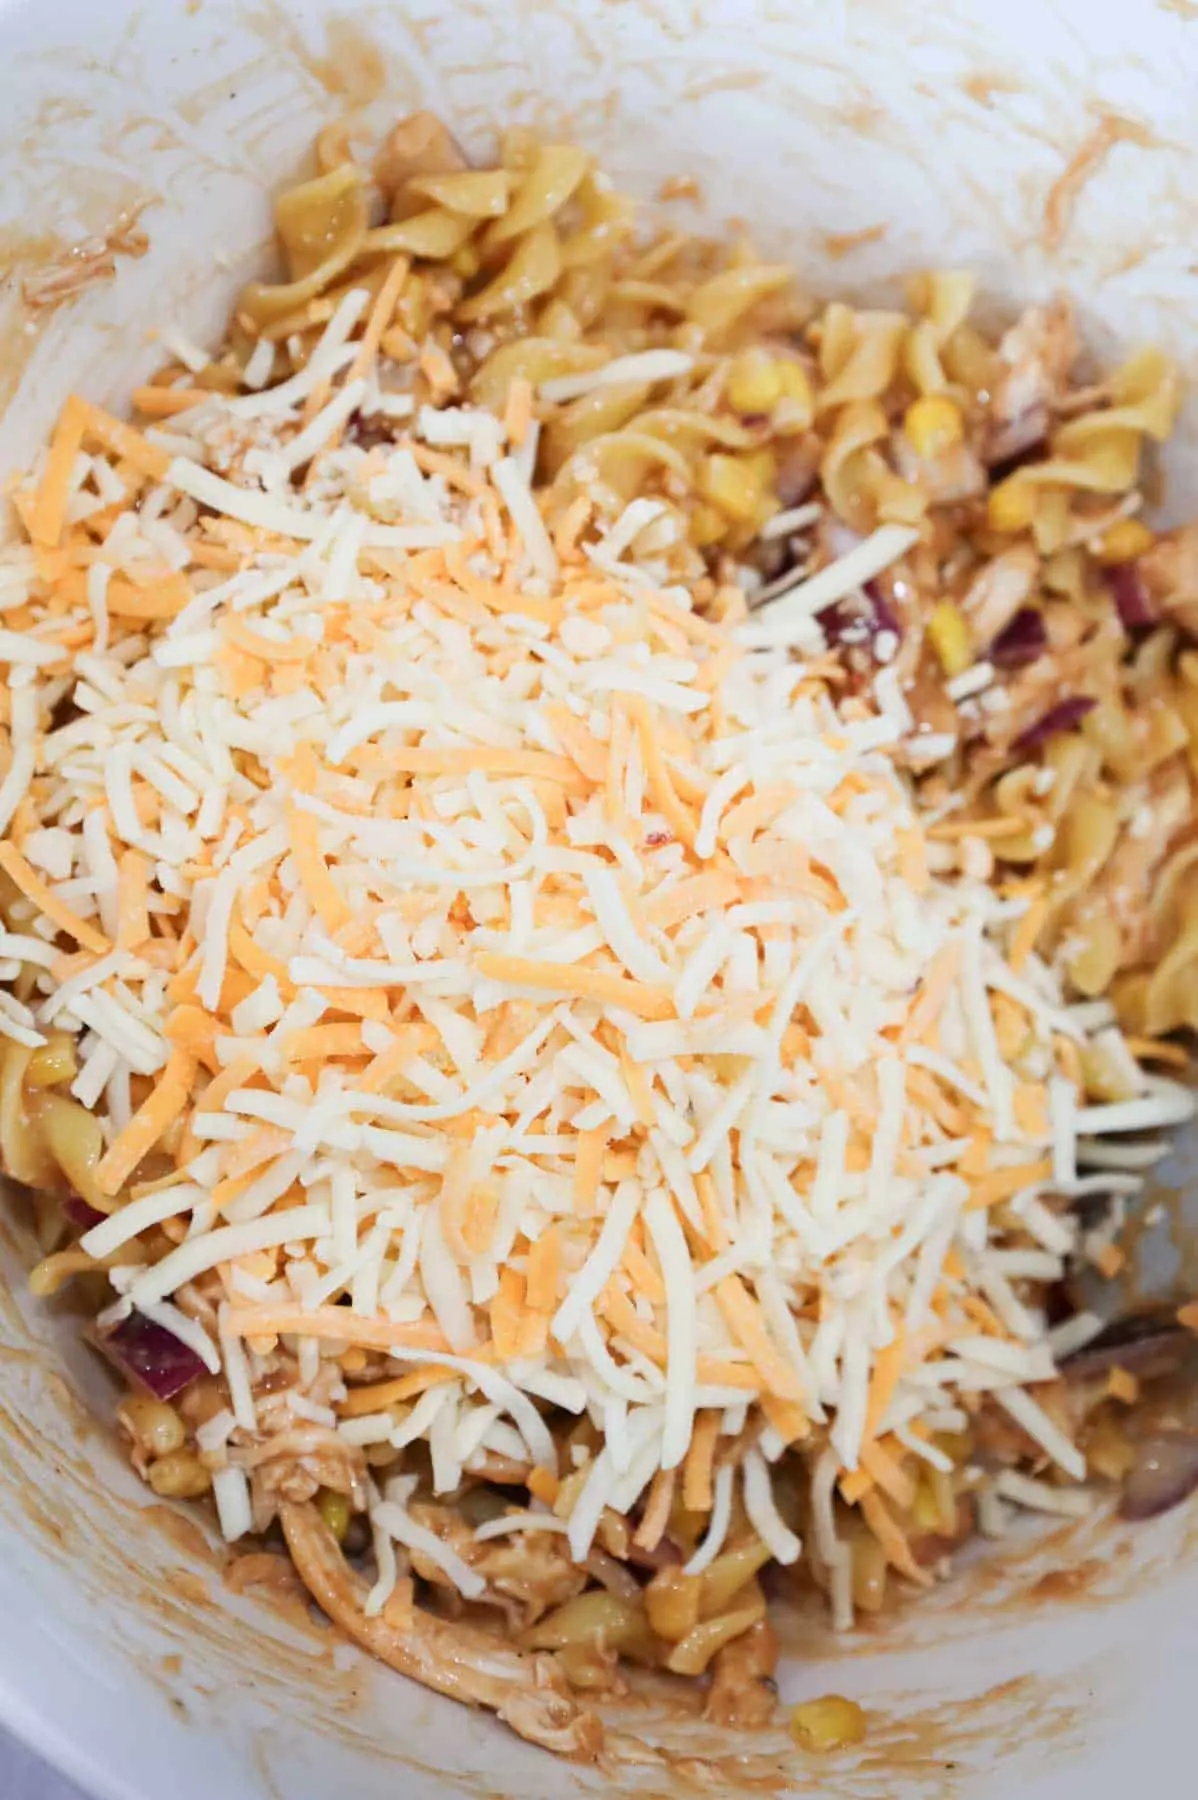 shredded cheddar cheese on top of bbq chicken and noodle mixture in a bowl